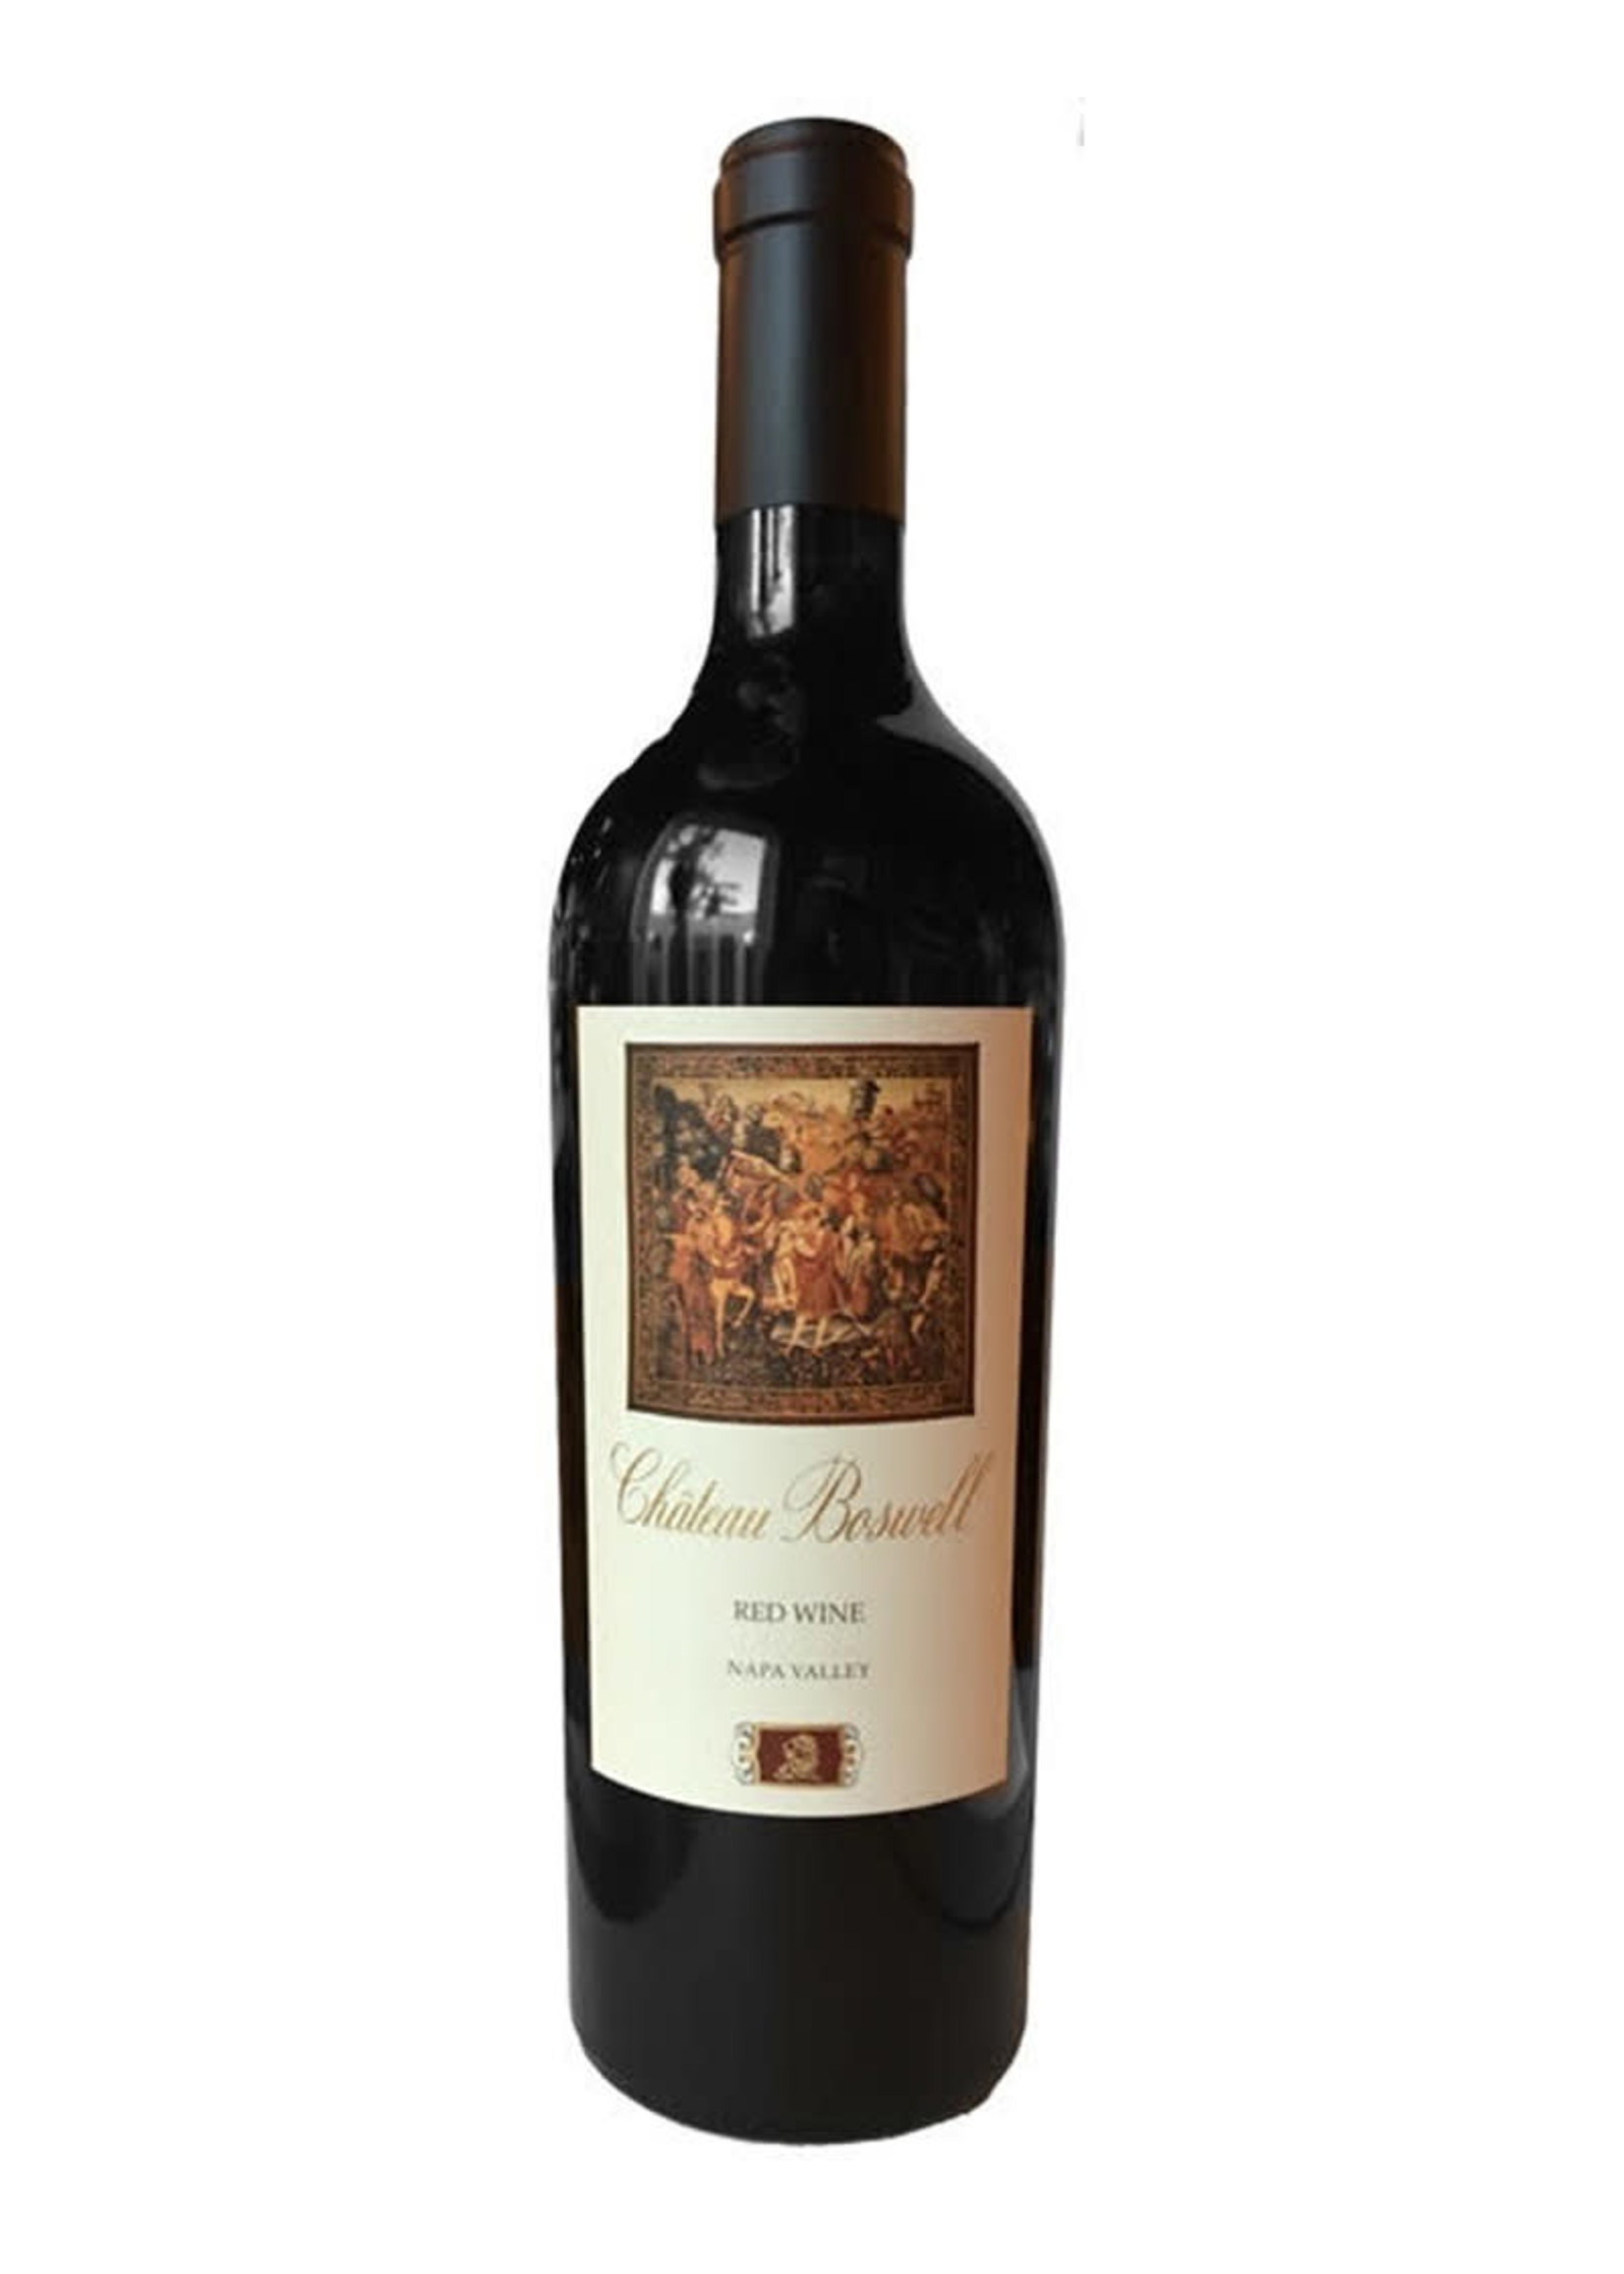 Château Boswell 2015 Red Blend, Napa Valley, California